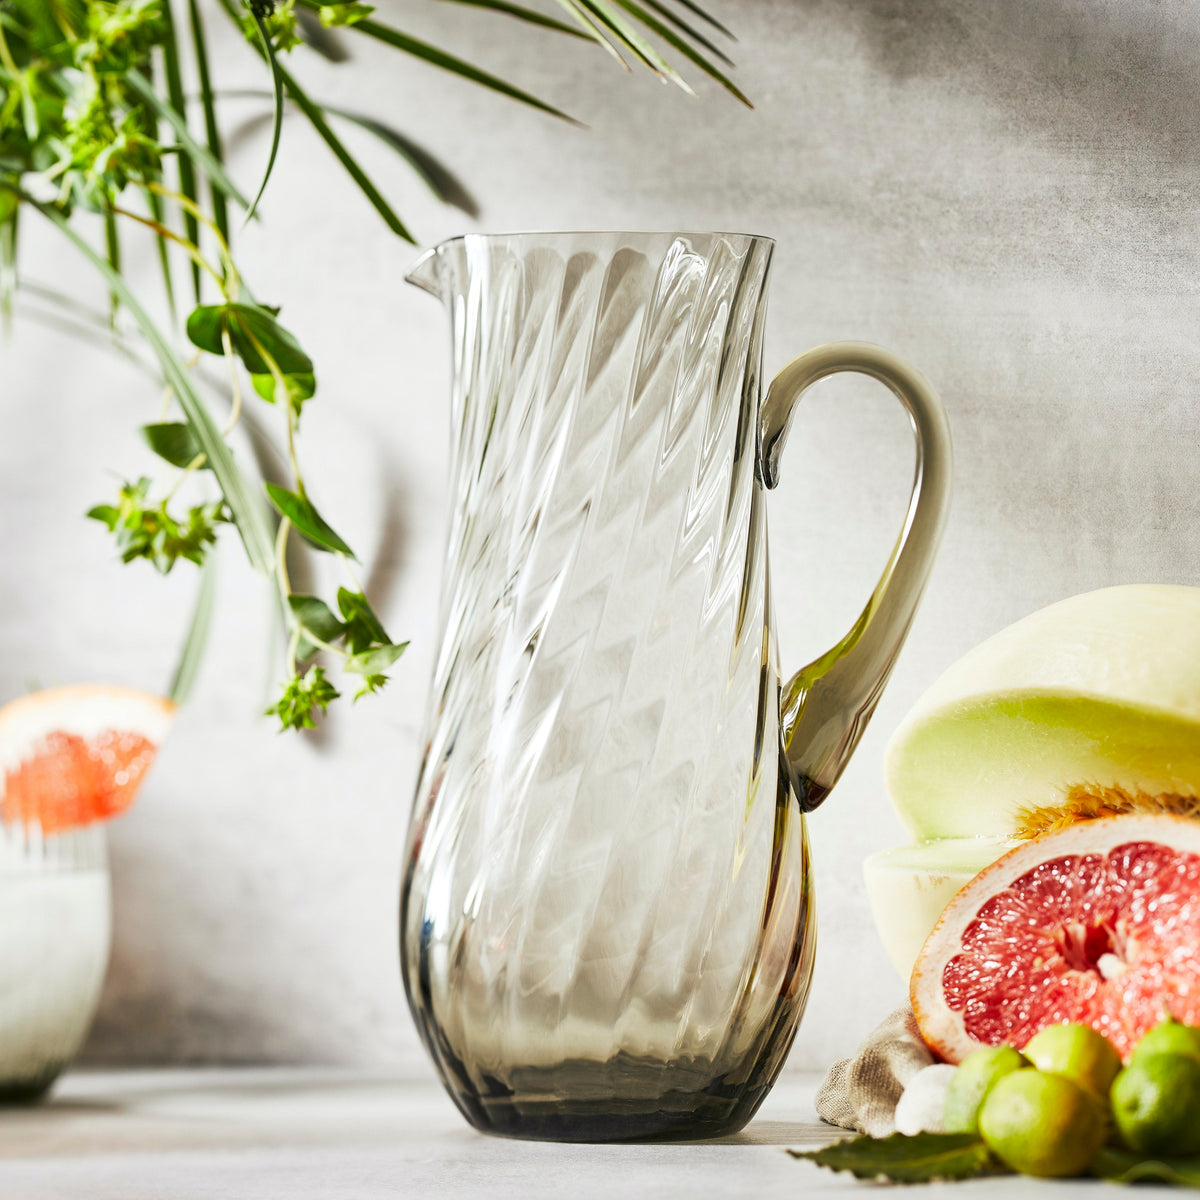 The mouth-blown crystal Quinn Smoke Pitcher by Caskata is shown on a sunny table with freshly cut citrus.